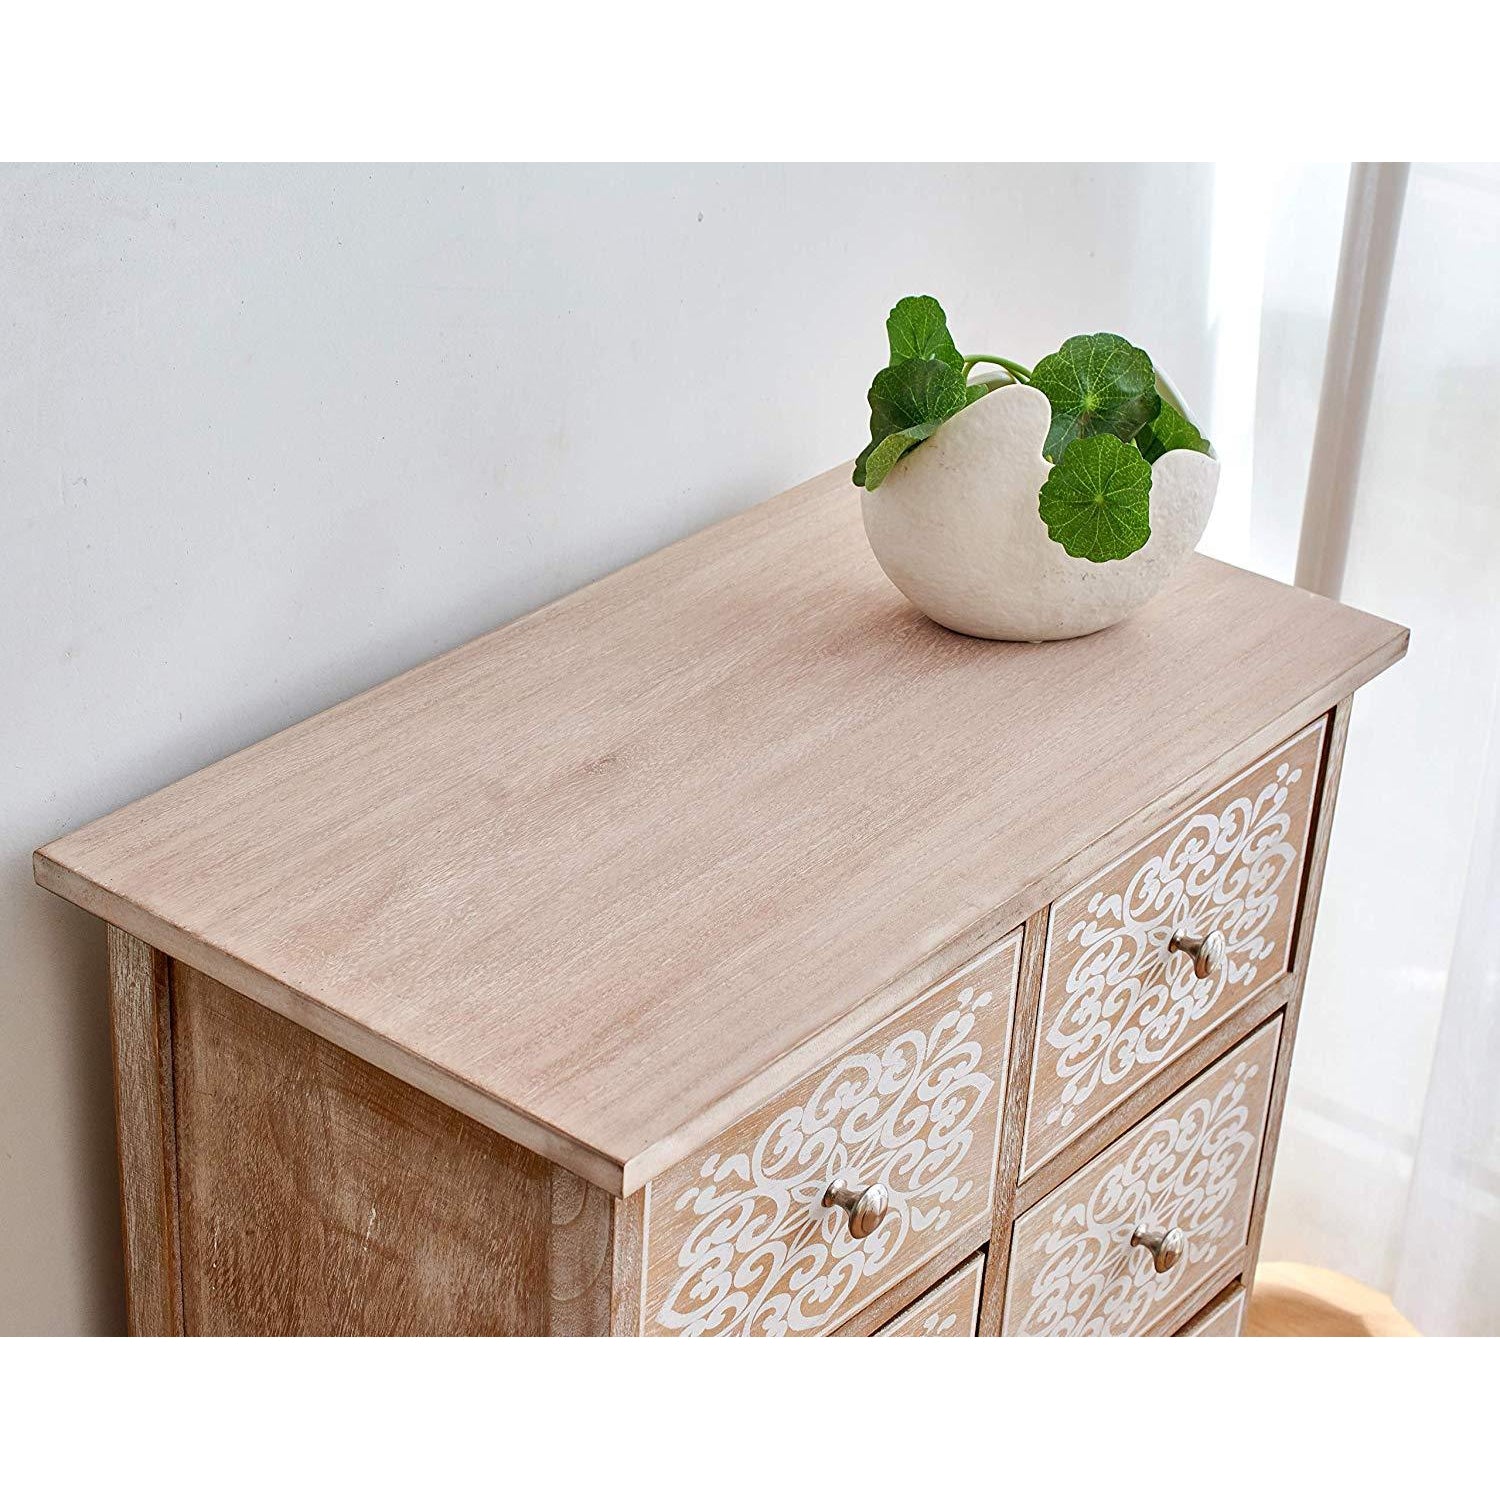 Cherry Tree Furniture 8-Drawer Natural Wood Cabinet Storage Unit Chest ...